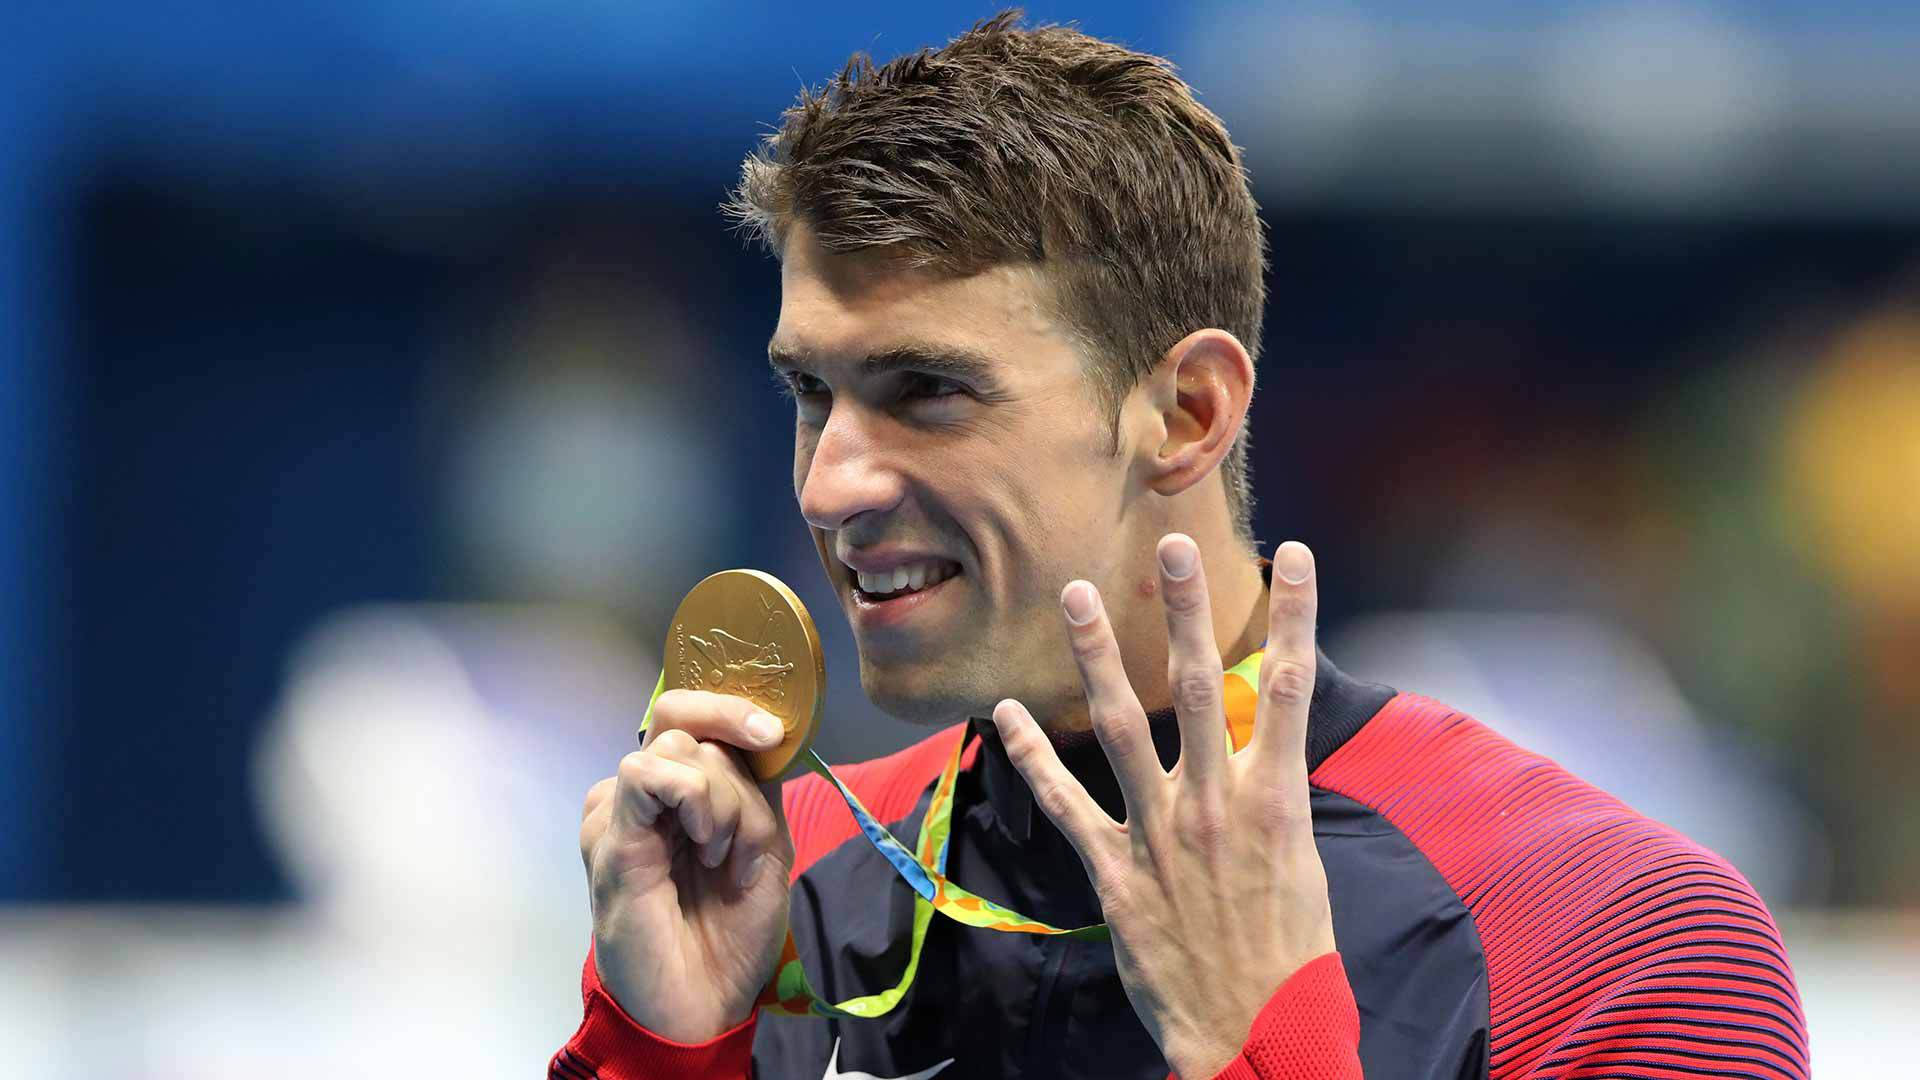 Michael Phelps Displaying Four Victory Signs After Winning Wallpaper